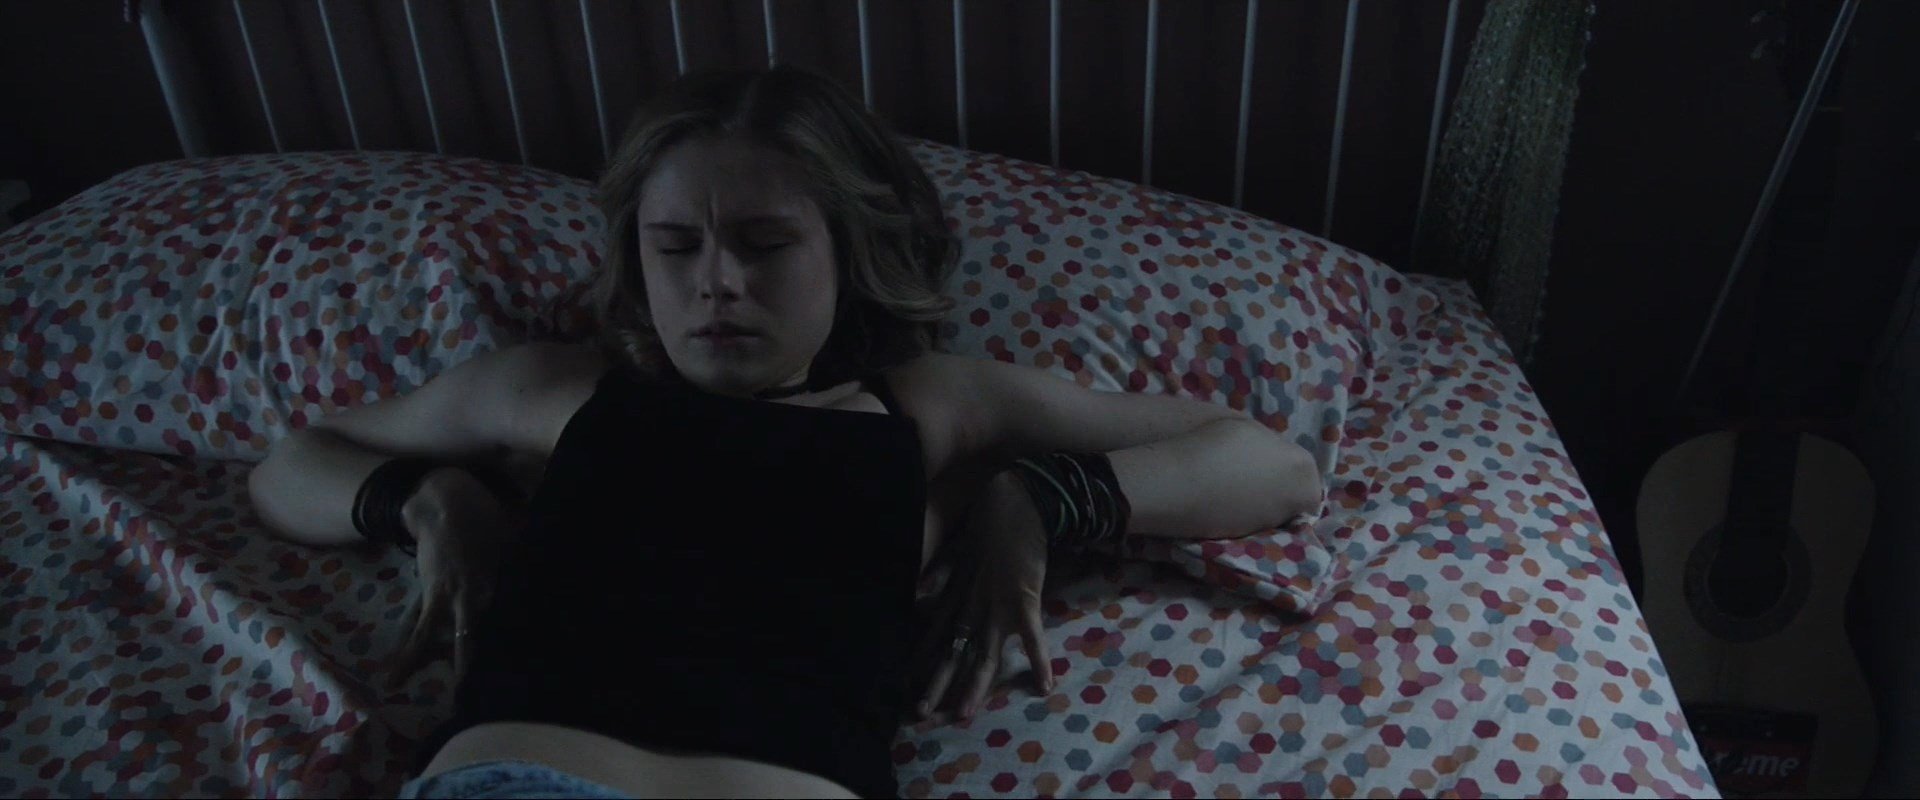 Here is Erin Moriarty’s edited video from "Within" (aka Crawlspac...